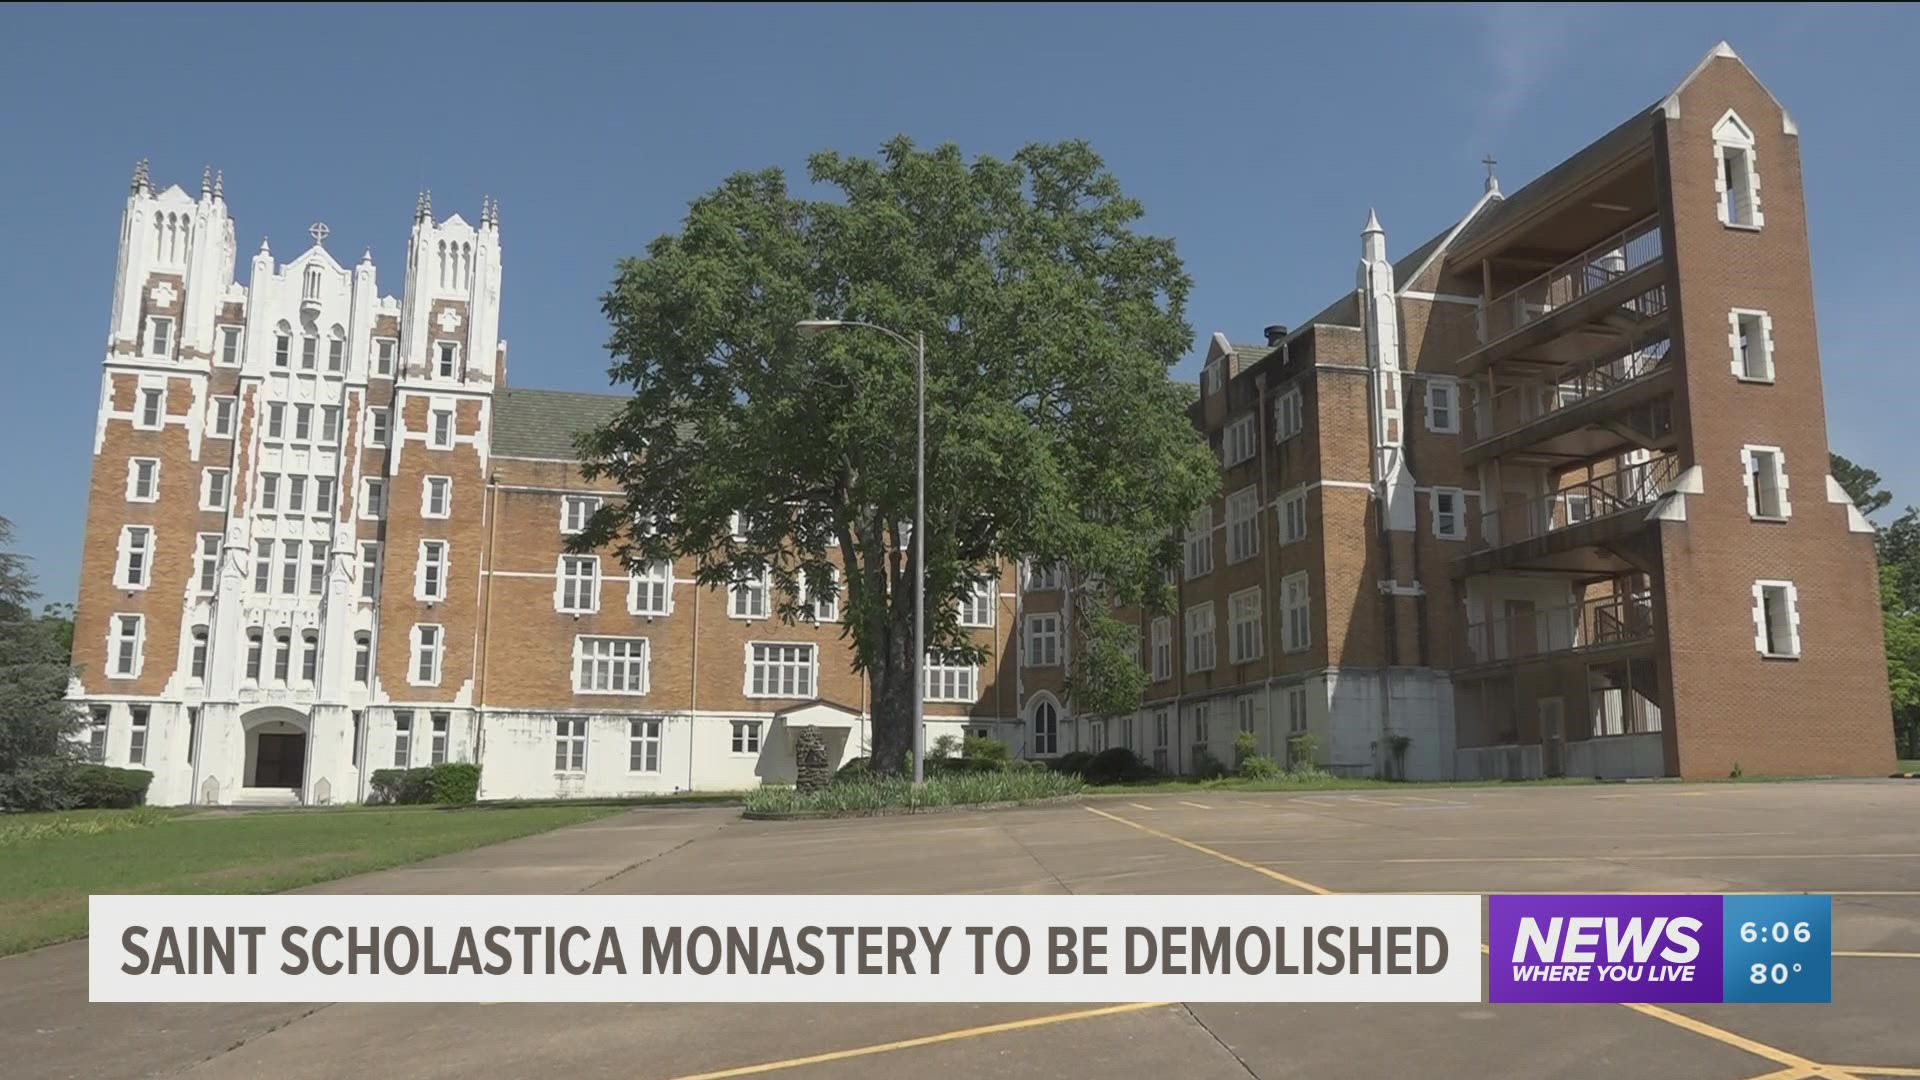 After standing for nearly a century, the St. Scholastica Monastery in Fort Smith will be demolished this summer.